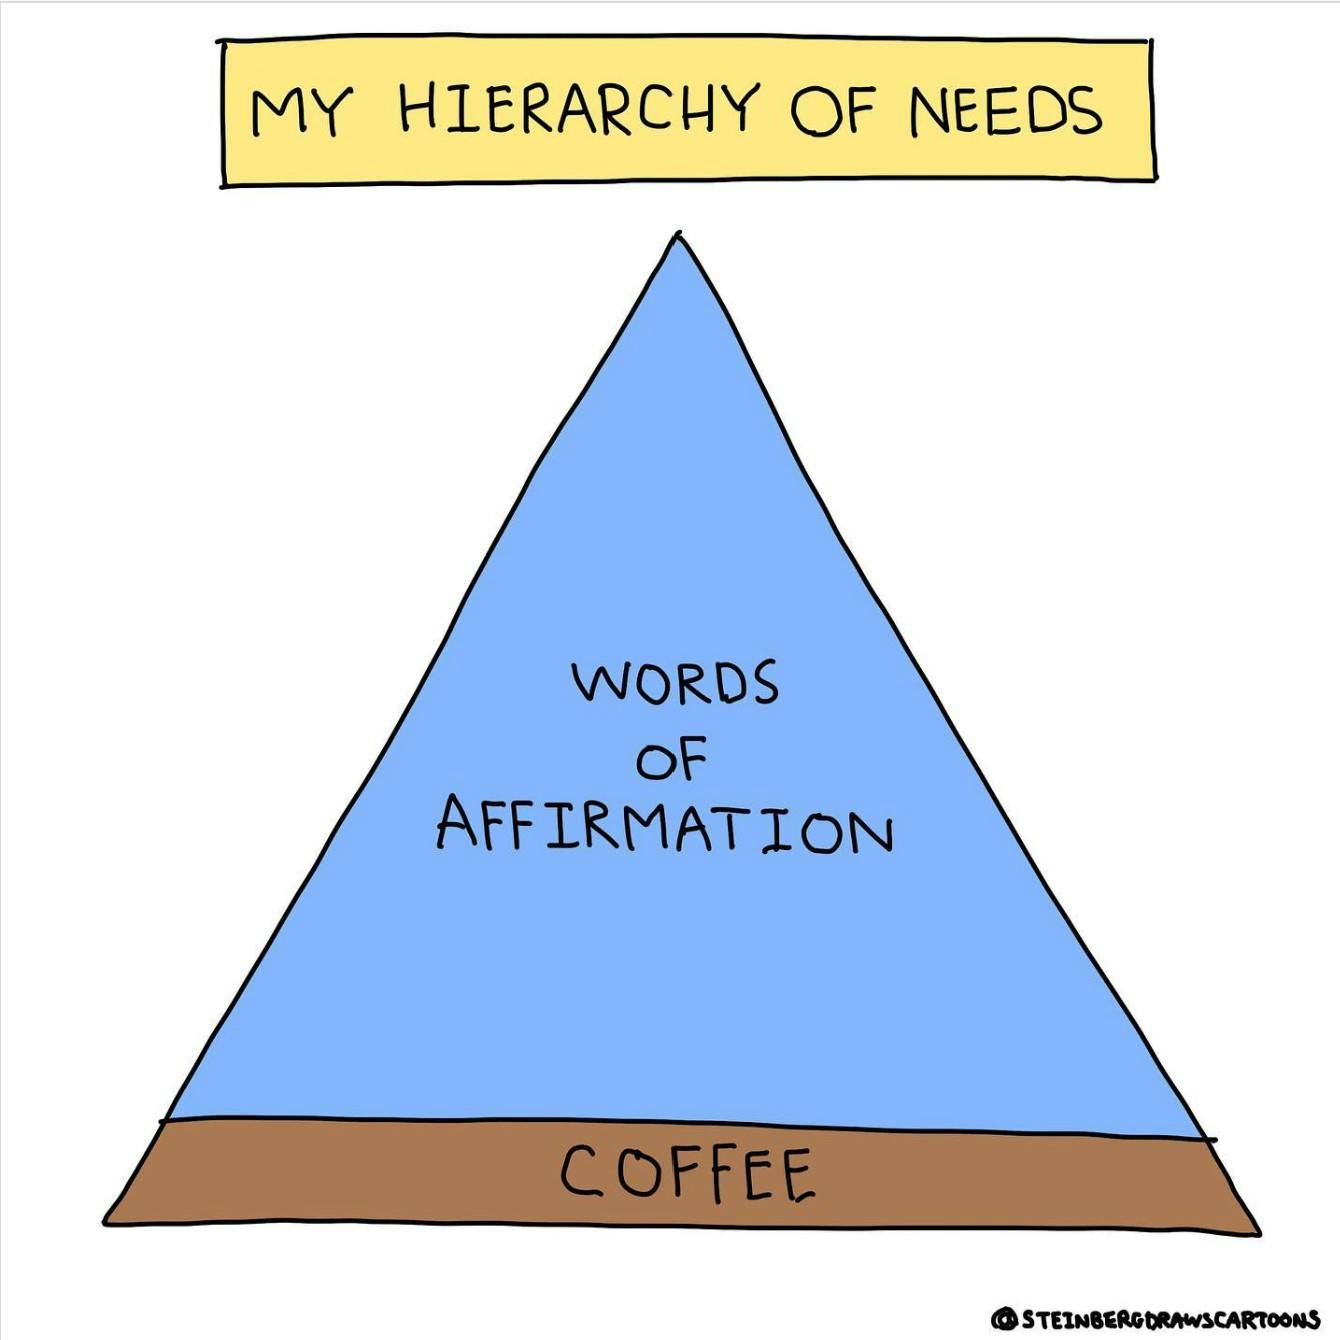 Yellow box at the top that says "My Hierarchy of  Needs" with a triangle underneath. The widest base of the triangle says "Coffee" in a brown bar" and the rest is a large blue triangle that says "Words of Affirmation"